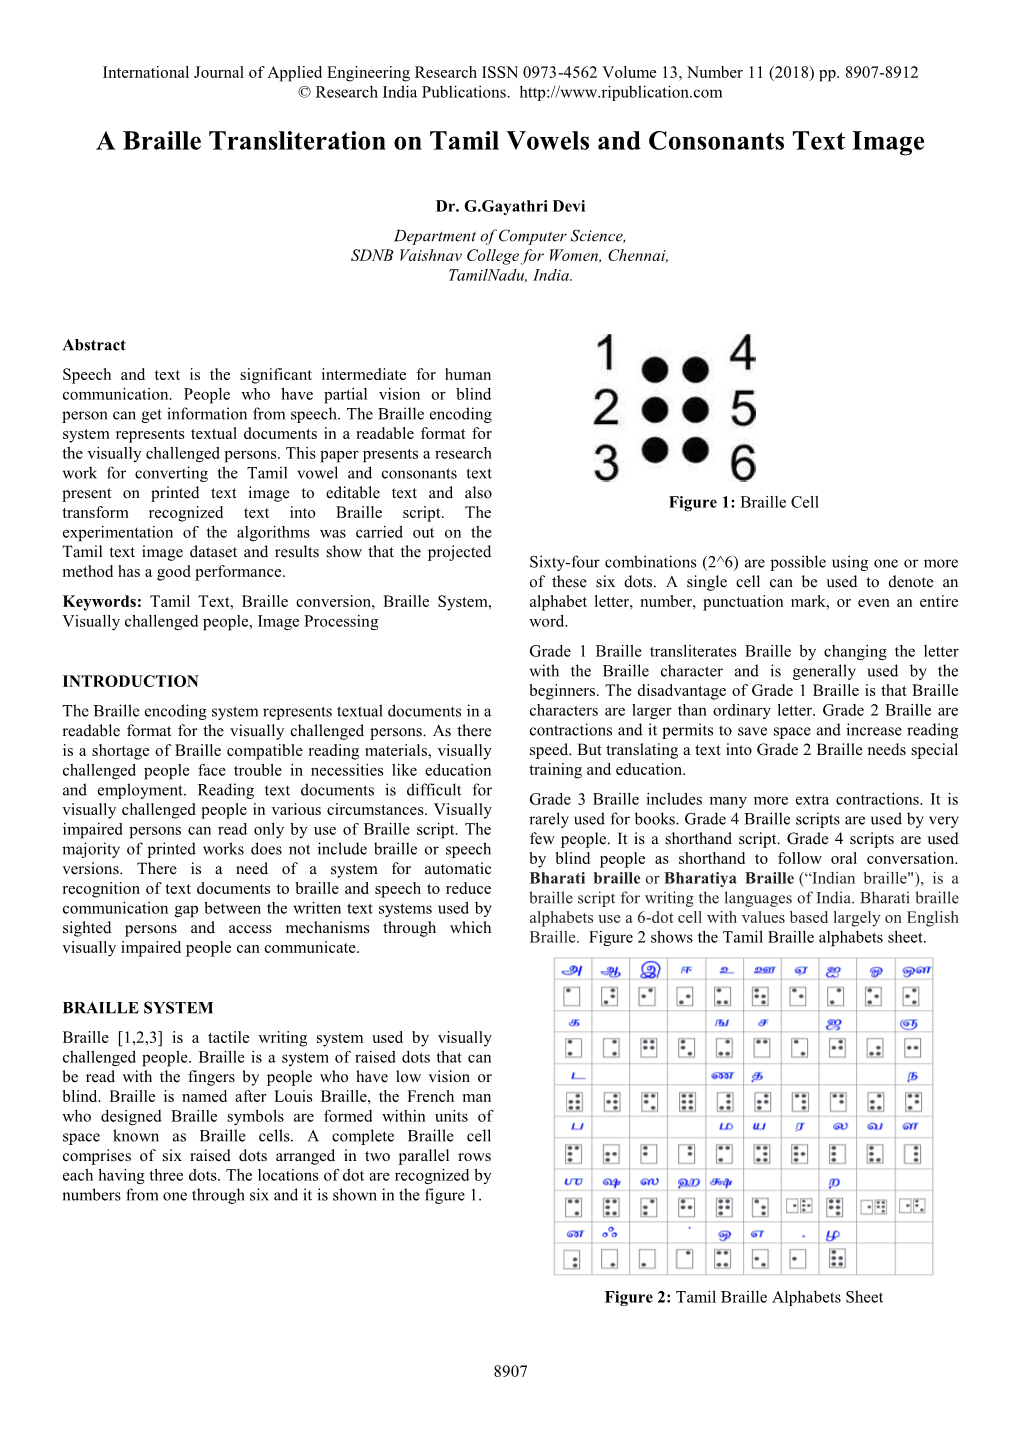 A Braille Transliteration on Tamil Vowels and Consonants Text Image